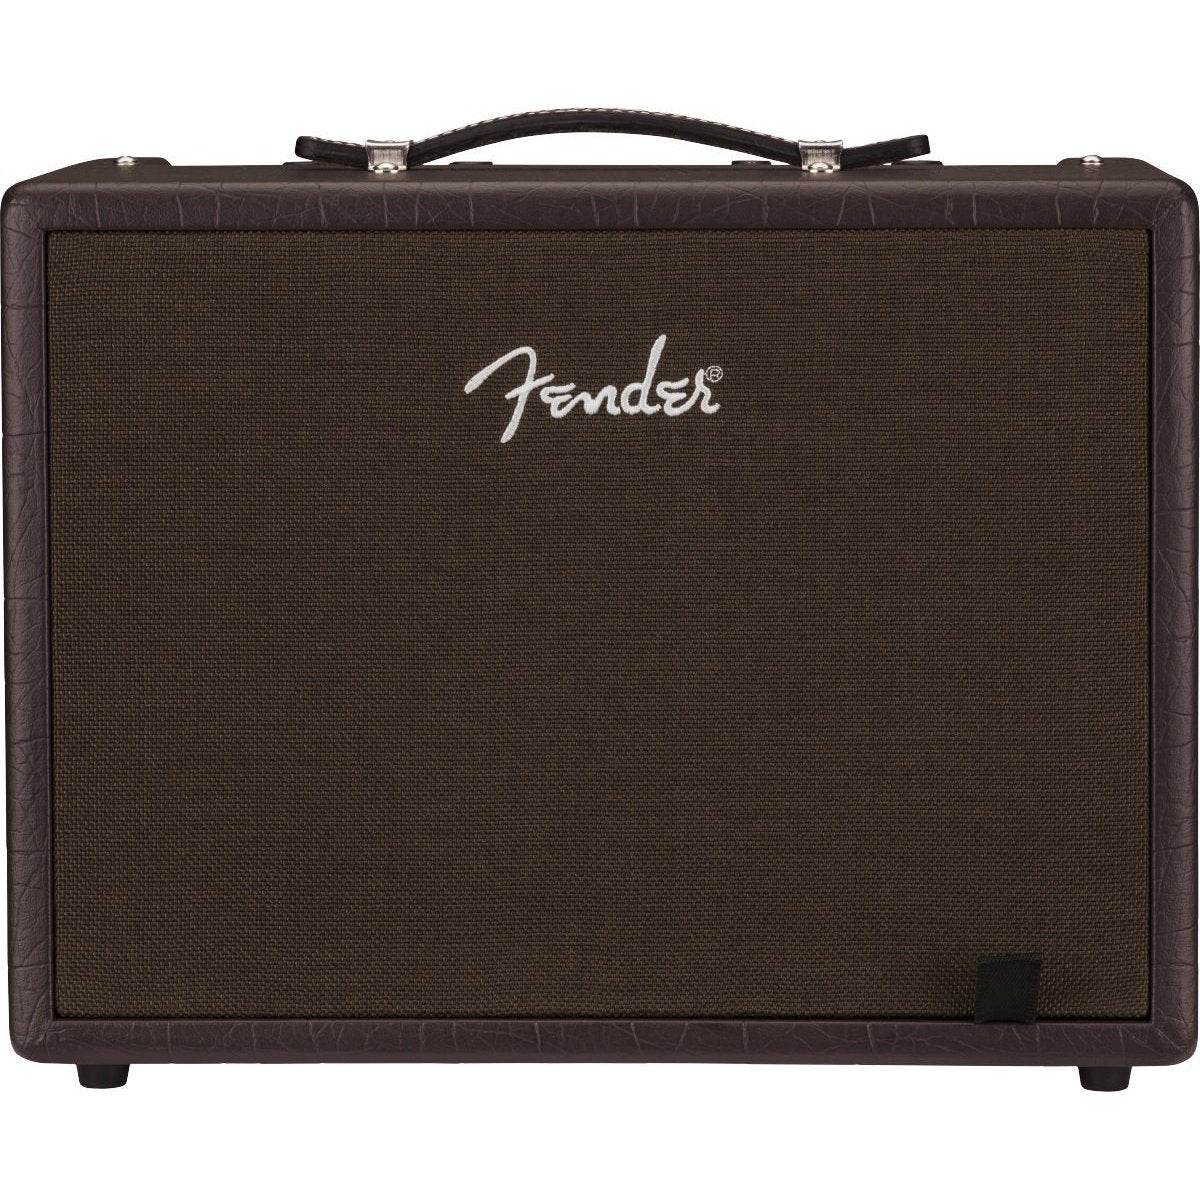 Fender Acoustic Junior Acoustic Guitar Amp with 8" Speaker-100 Watts-Music World Academy